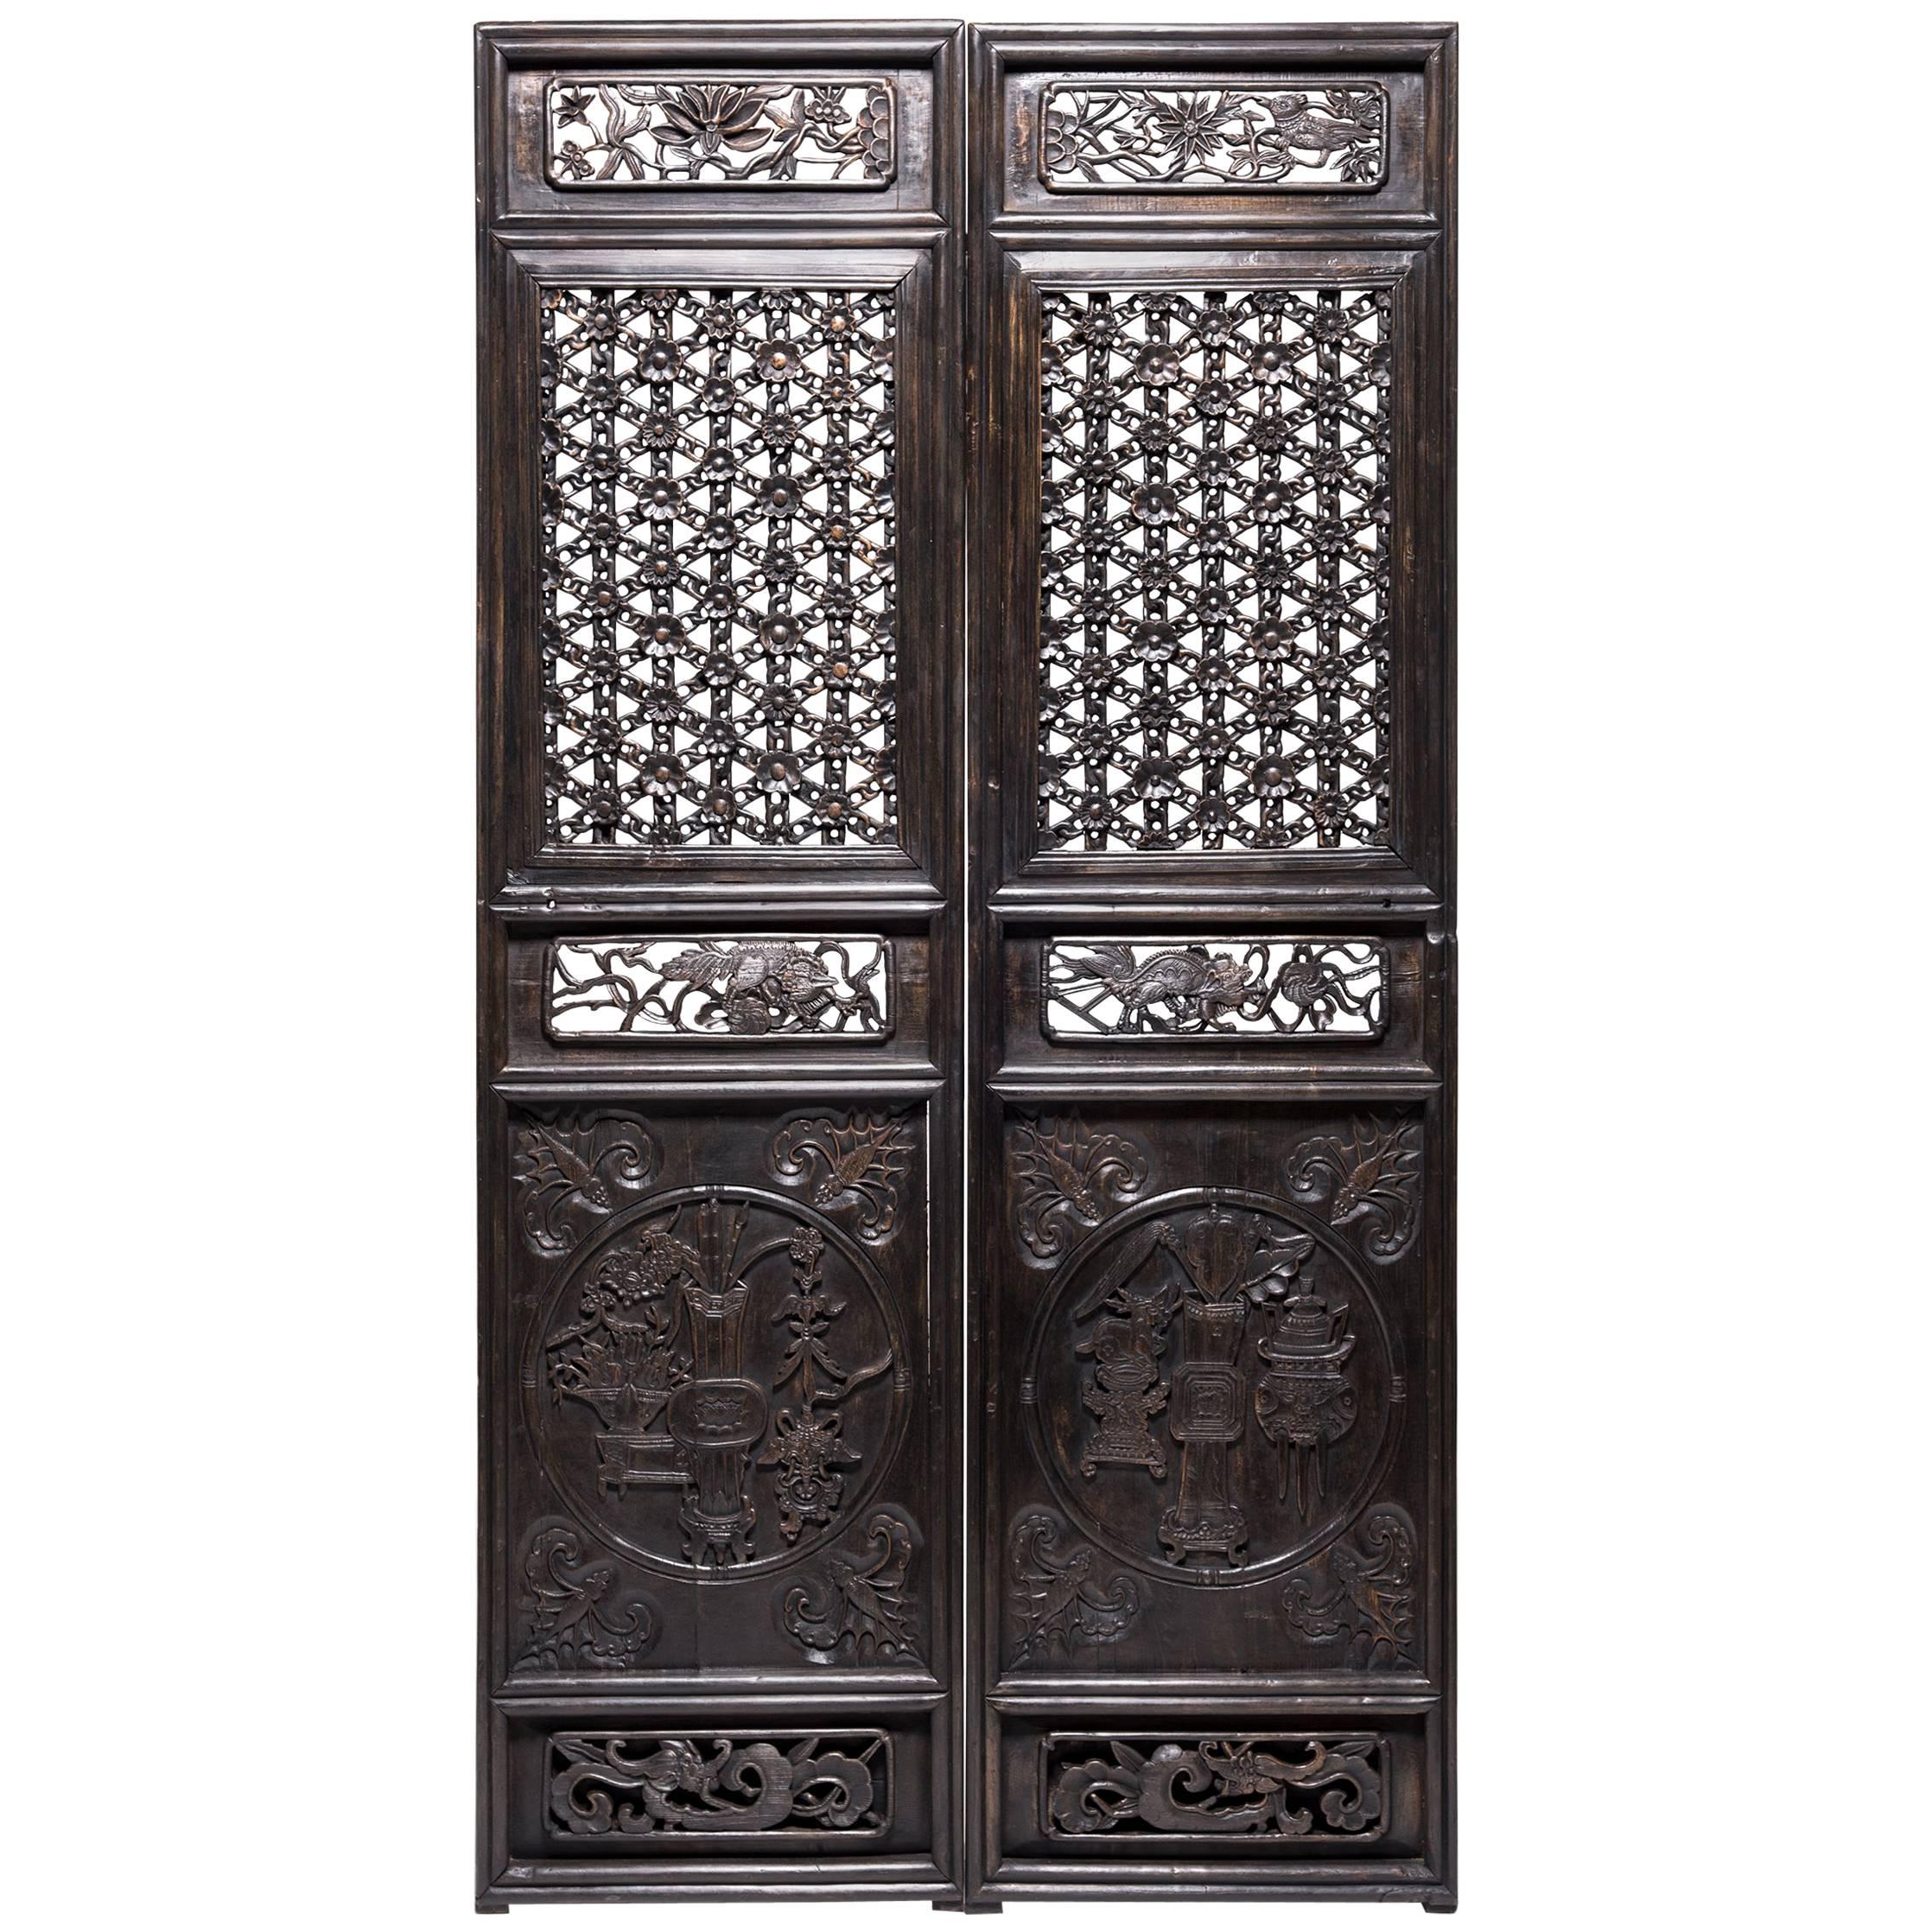 Pair of Chinese Floral Chainlink Lattice Panels, c. 1800 For Sale